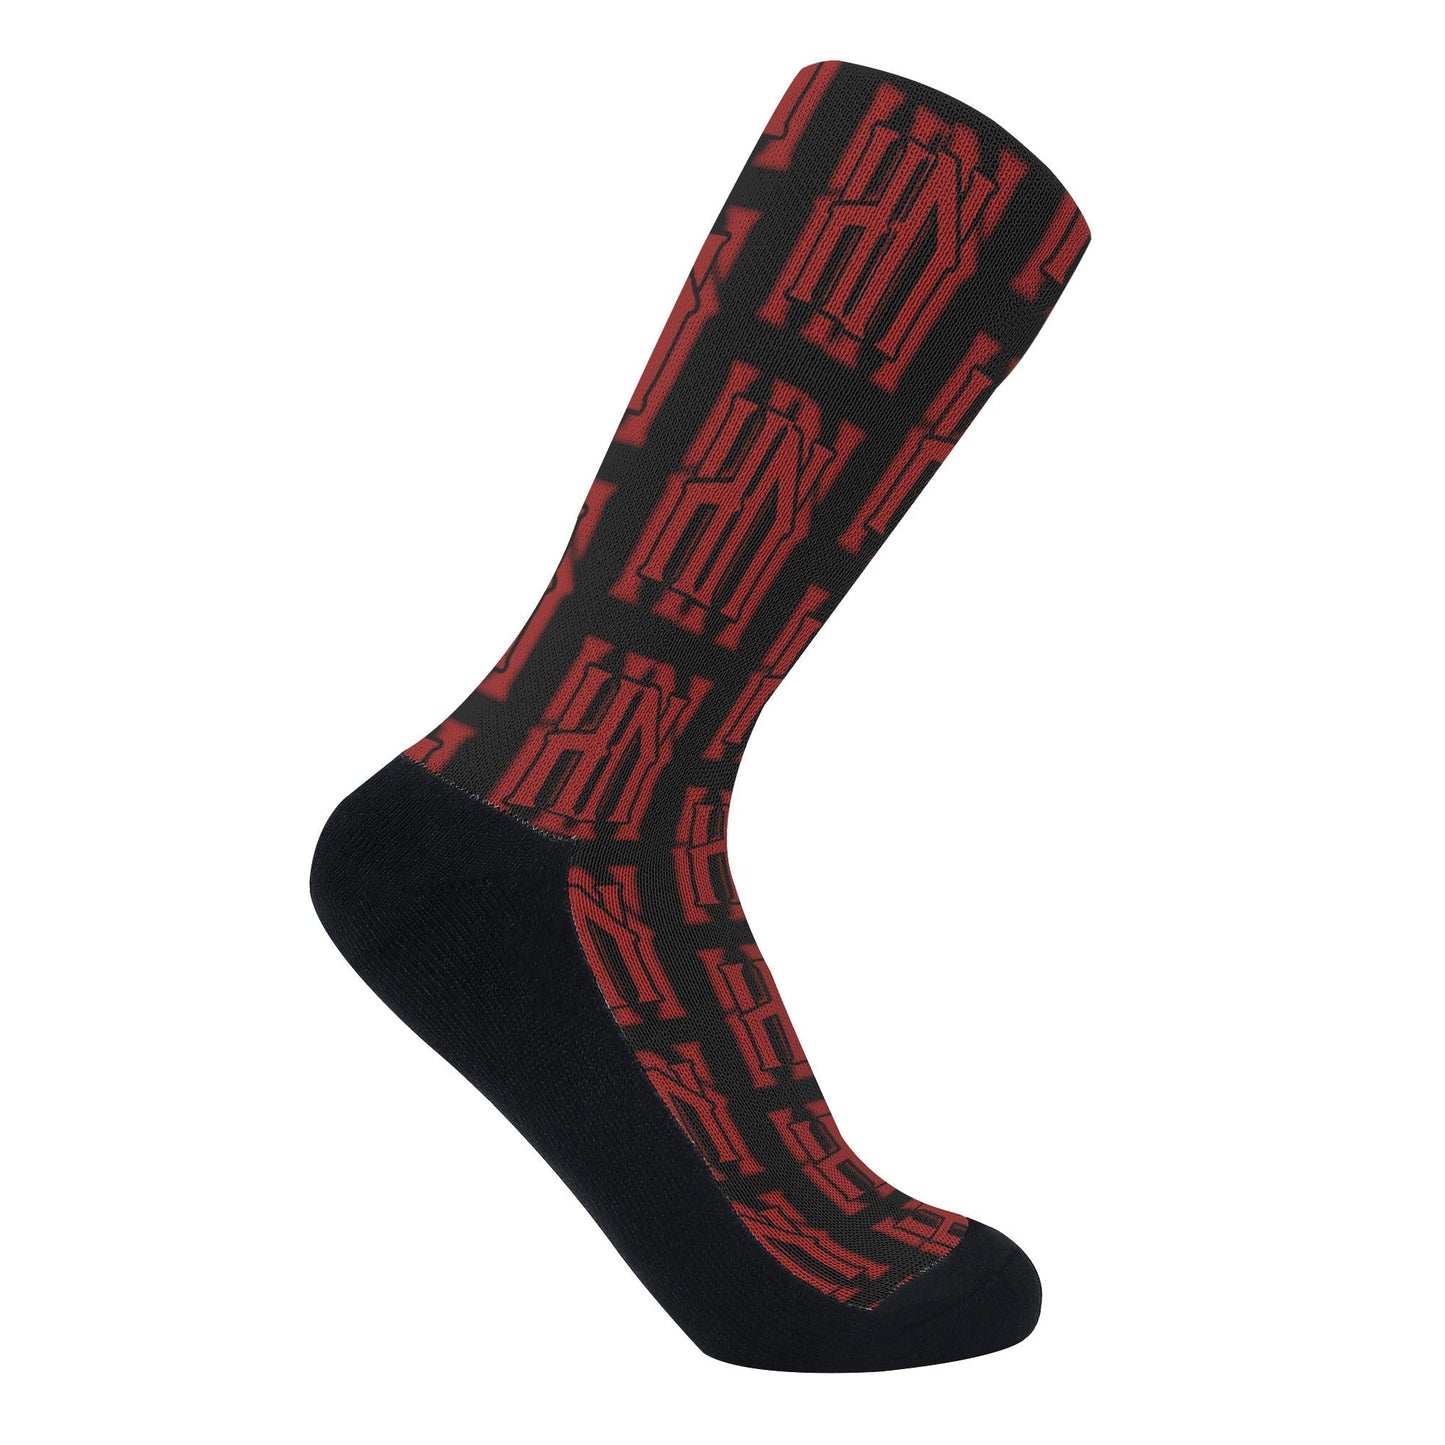 Stand out  with the  HN Crew Socks  available at Hey Nugget. Grab yours today!